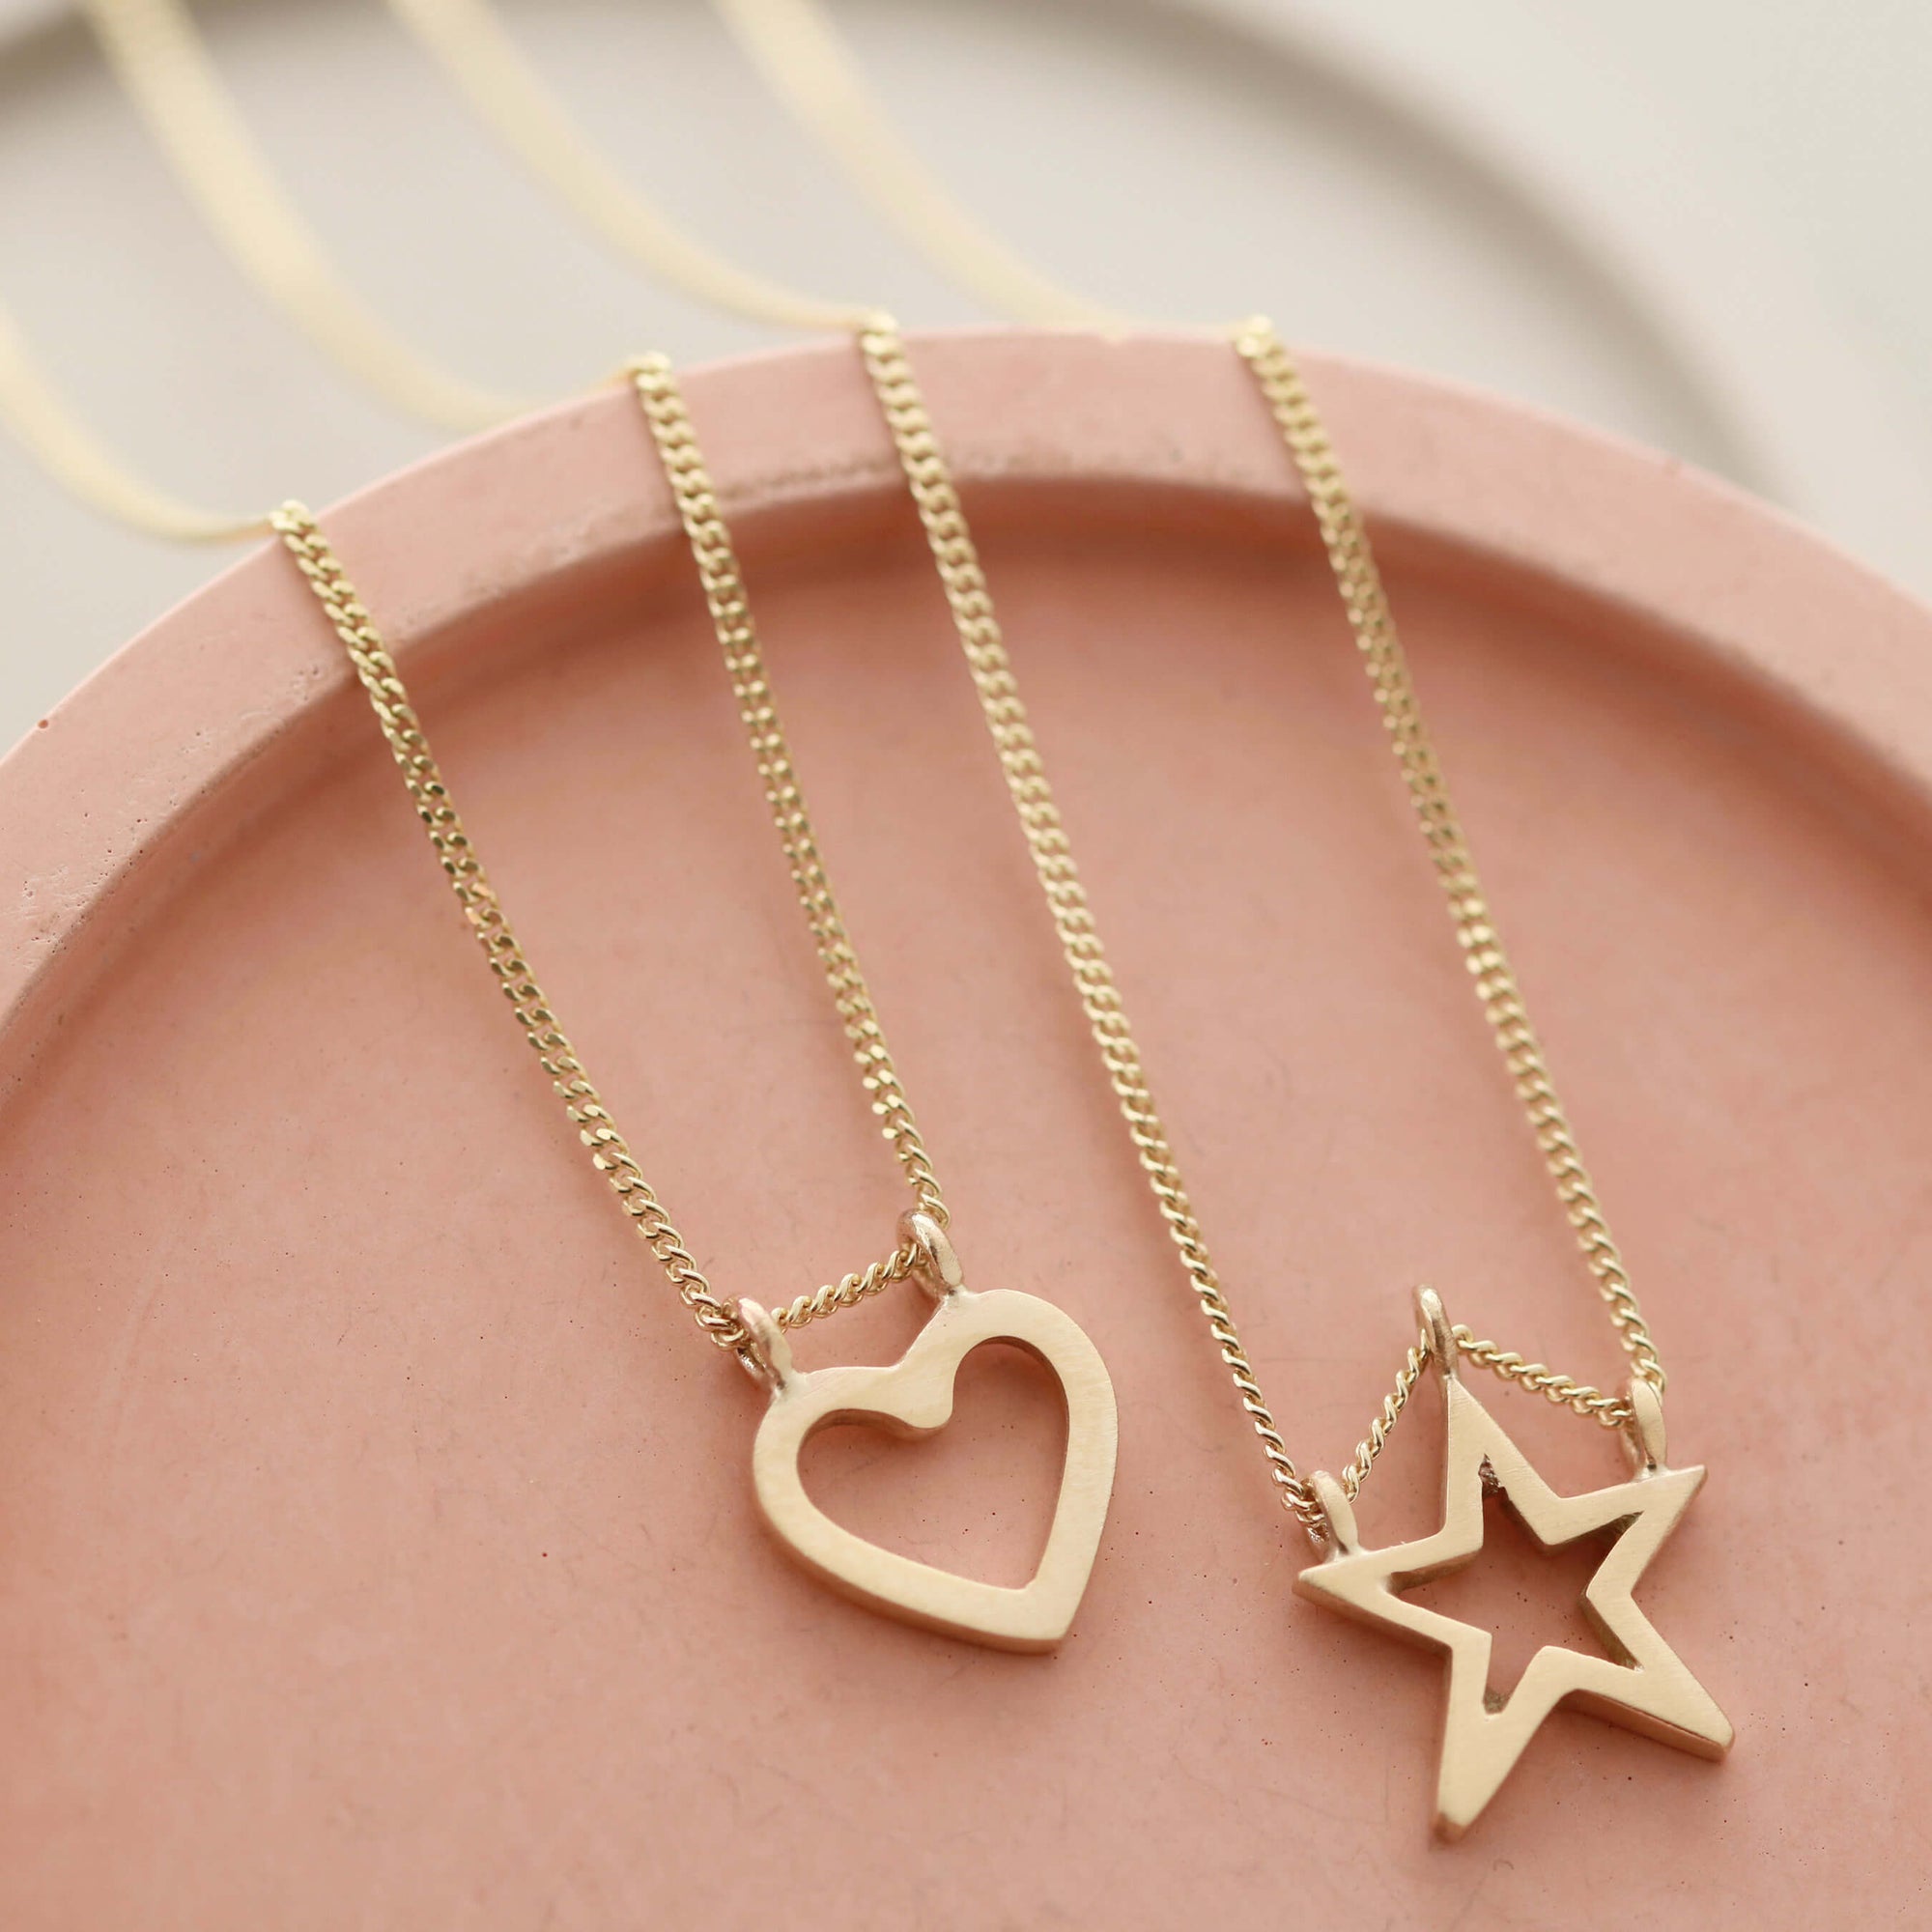 gold heart necklace uk